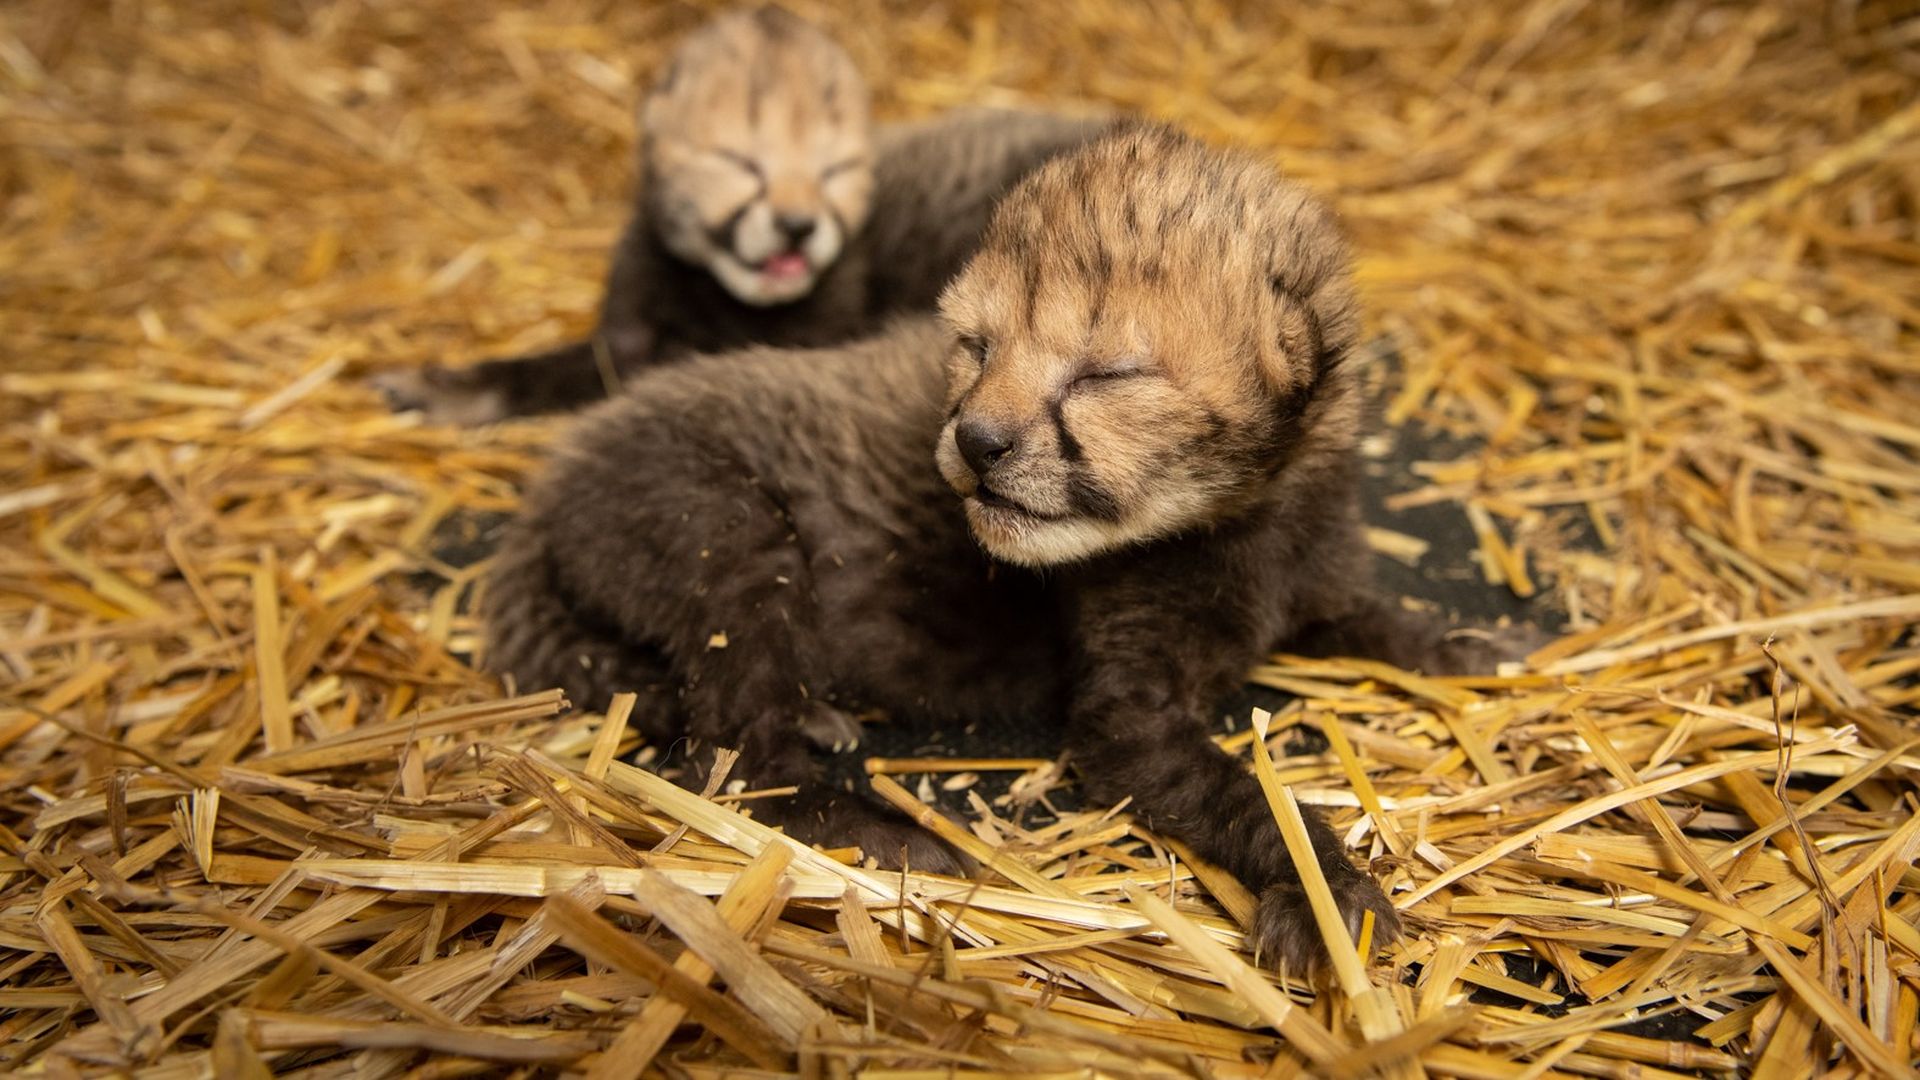 Two cheetah cubs with their eyes closed sit in a bed of straw